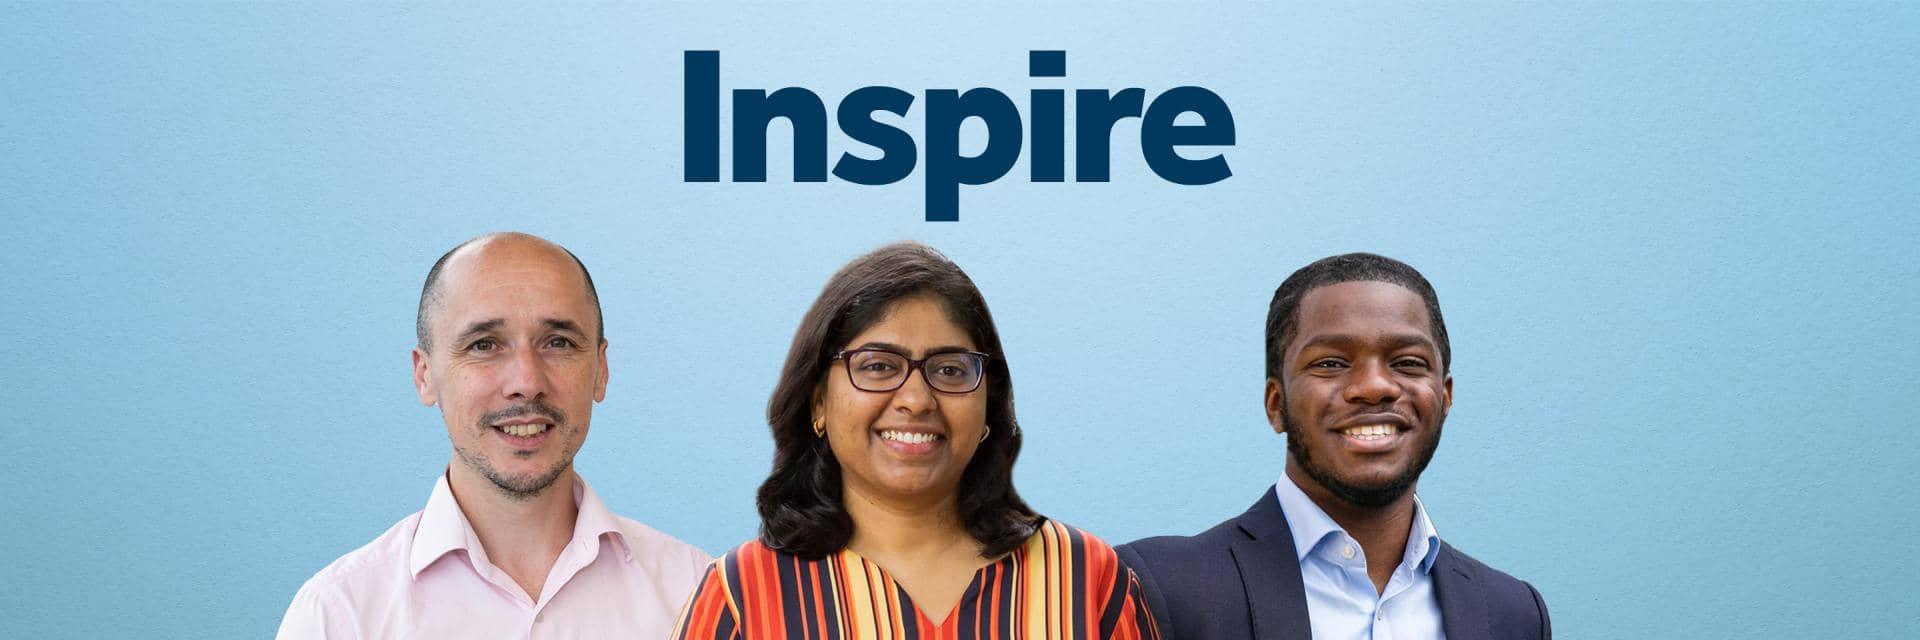 Images of the four co-chairs of Inspire